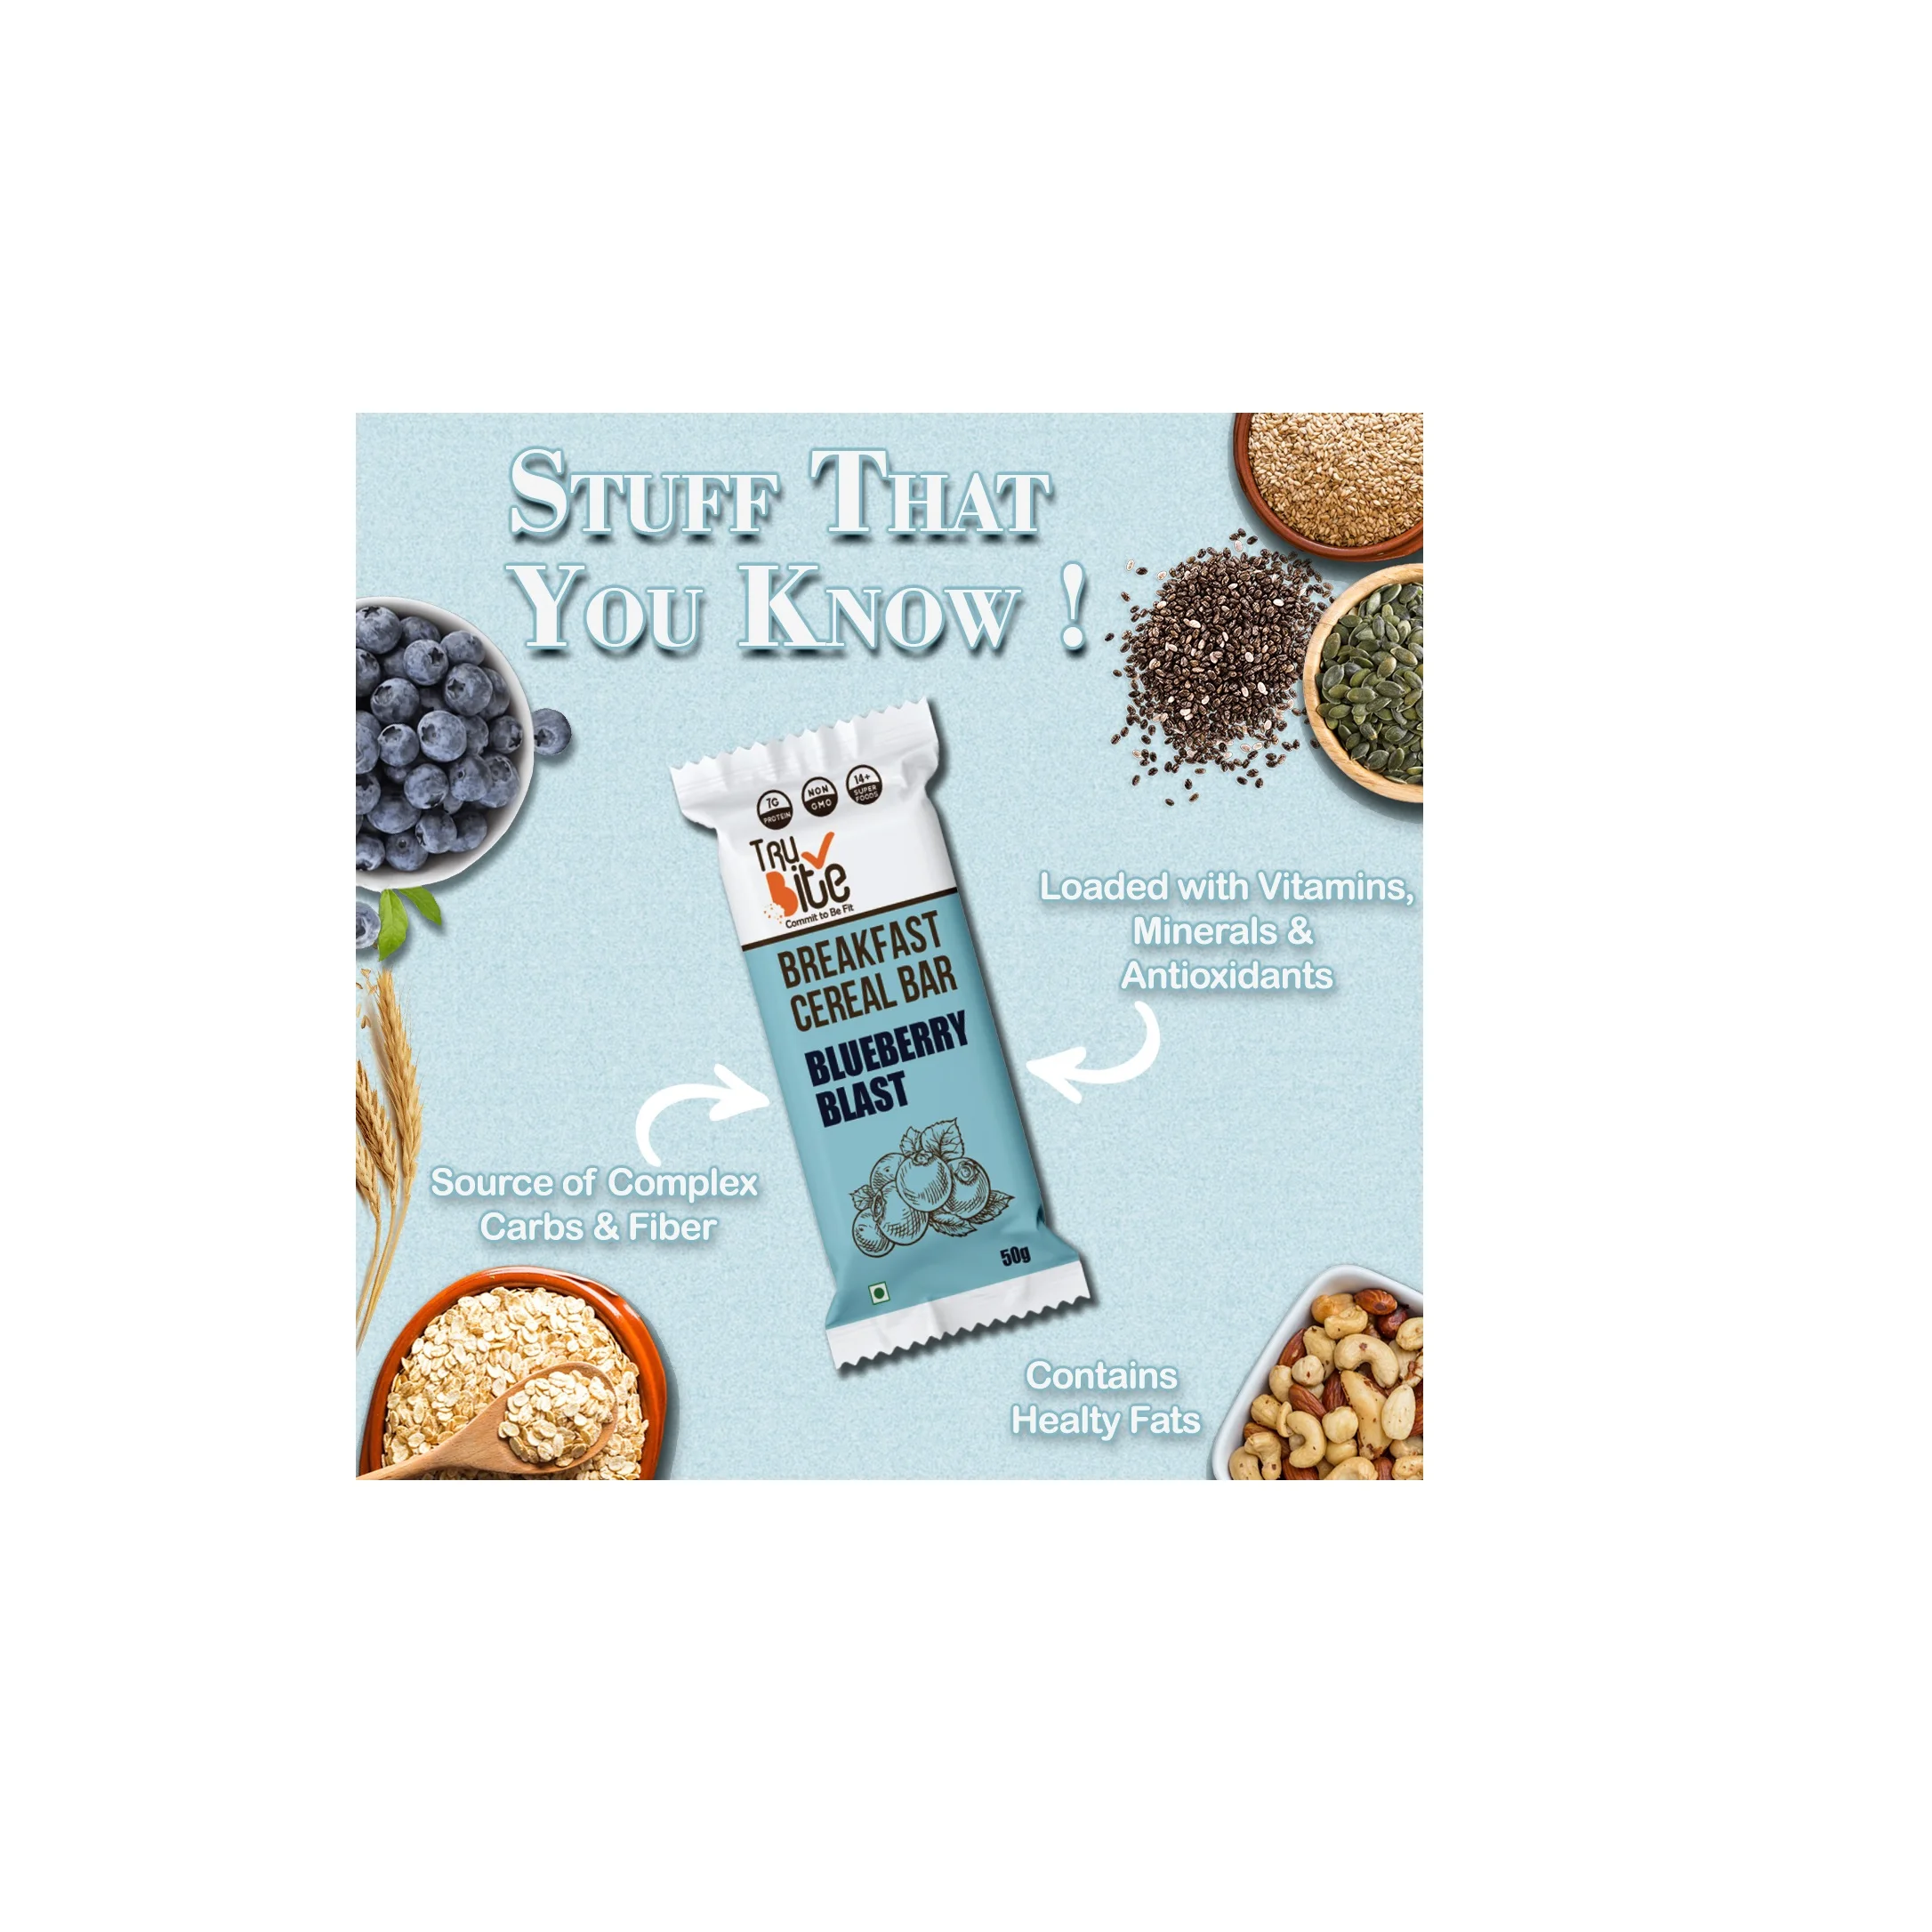 Best Quality Blueberry blast breakfast cereal bar energy bar with oats honey and roasted almond and variety of multi grain (1600497508033)